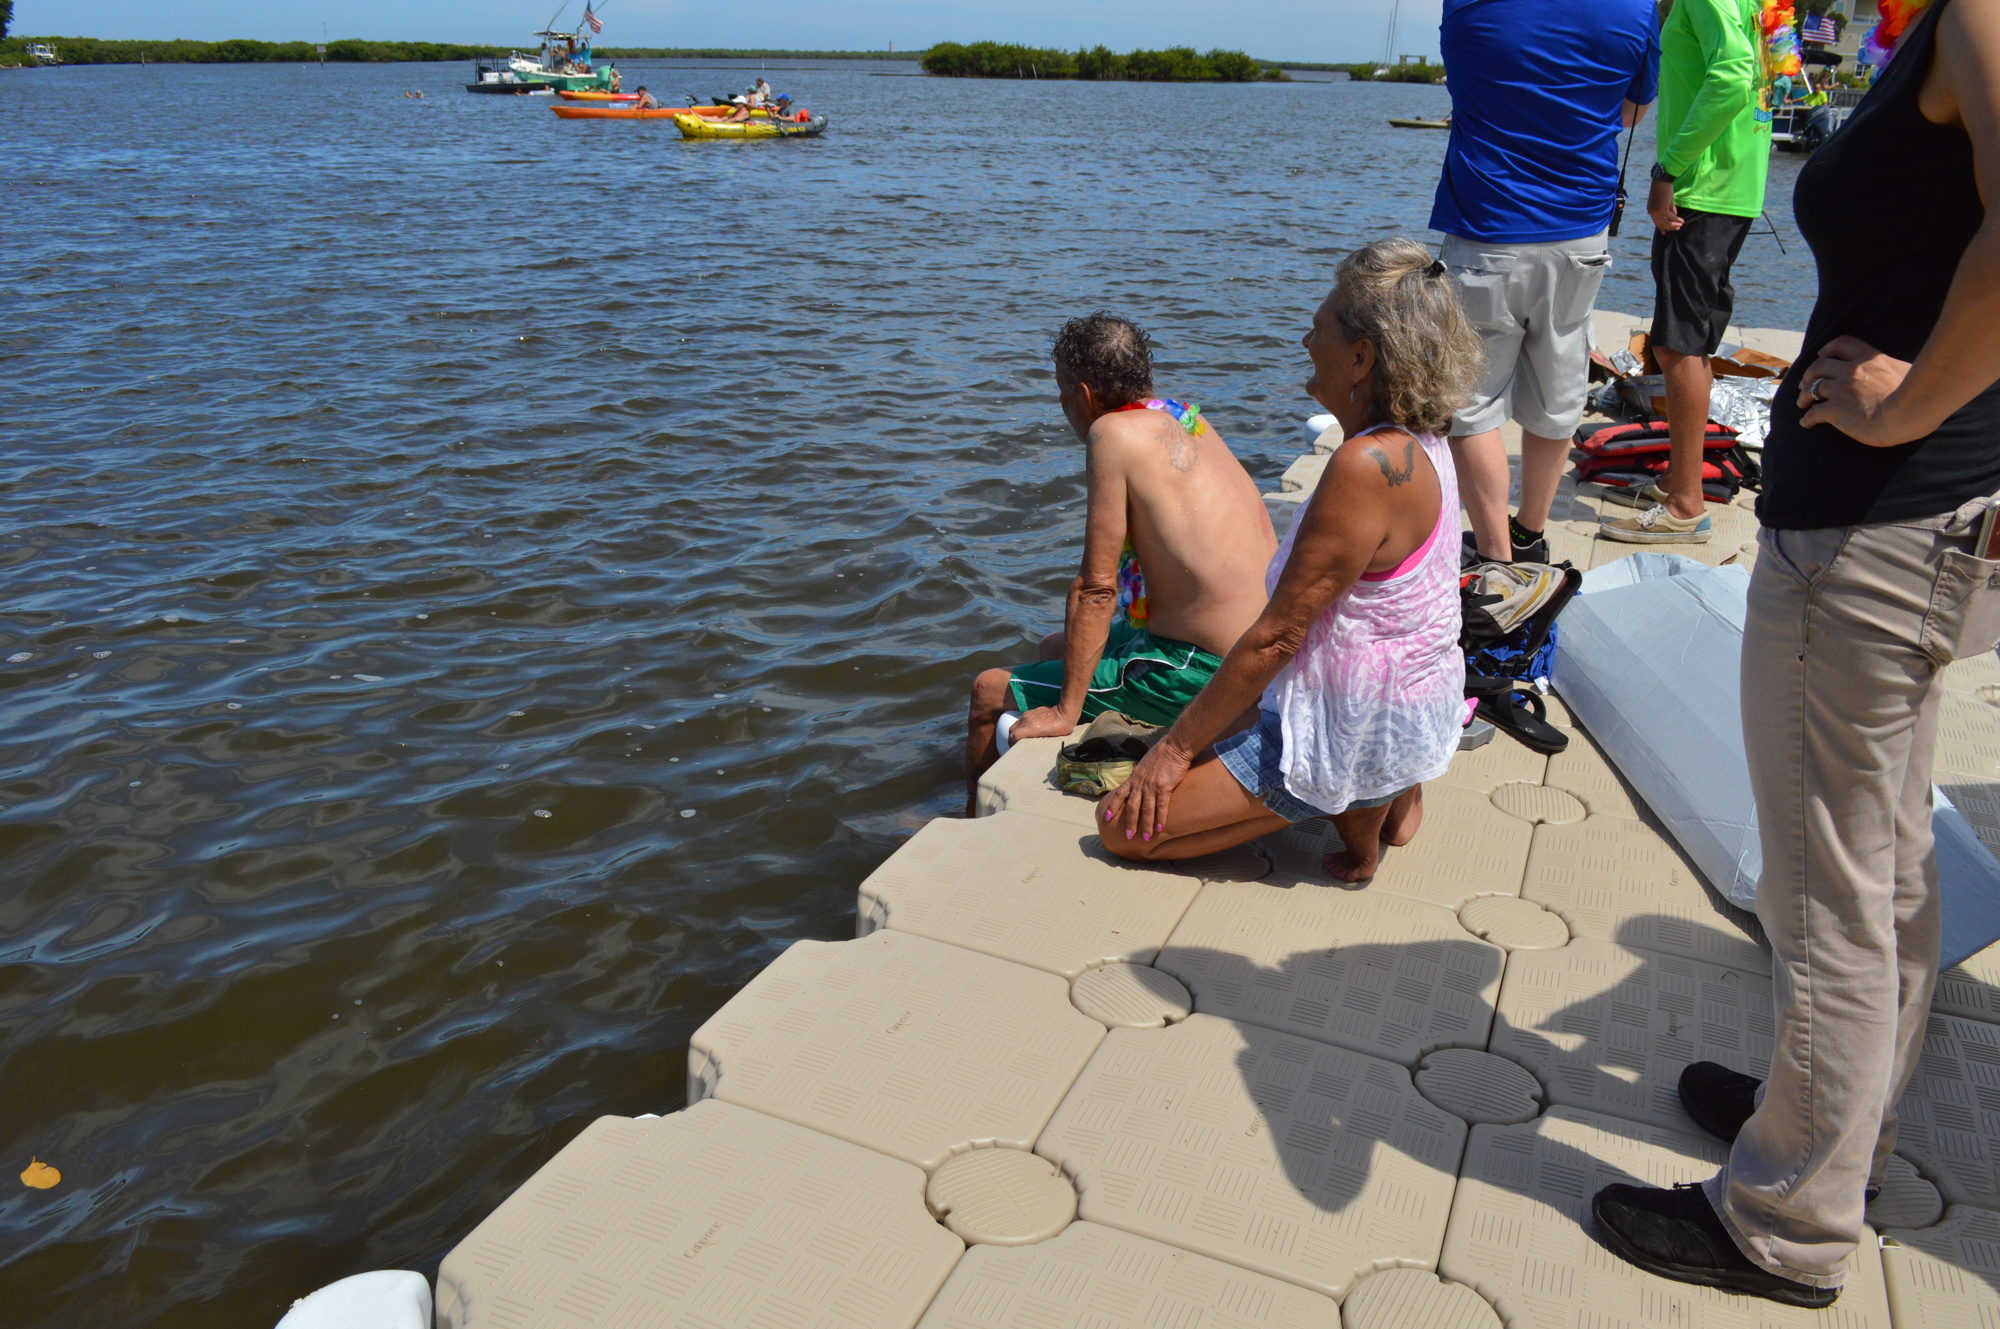 B.J. Devine and Renee Dodick eagerly watch the race from the dock. Photo by Caroline Smith